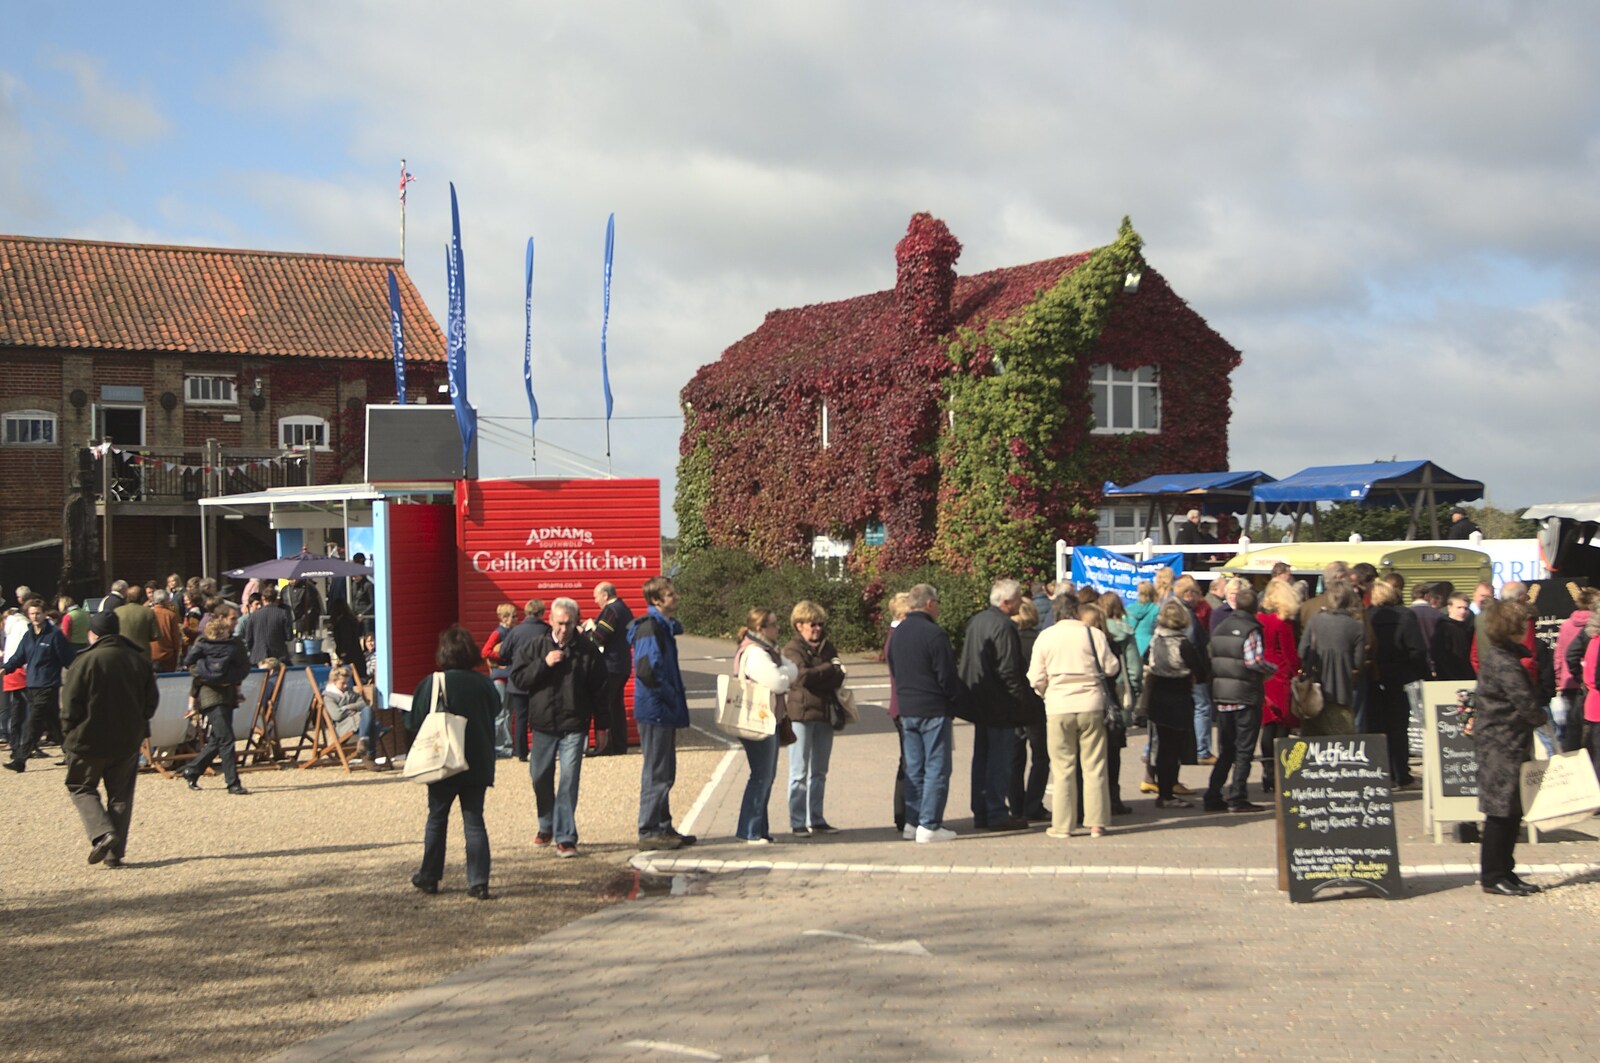 The Aldeburgh Food Festival, Snape Maltings, Suffolk - 25th September 2010: Out in the yard